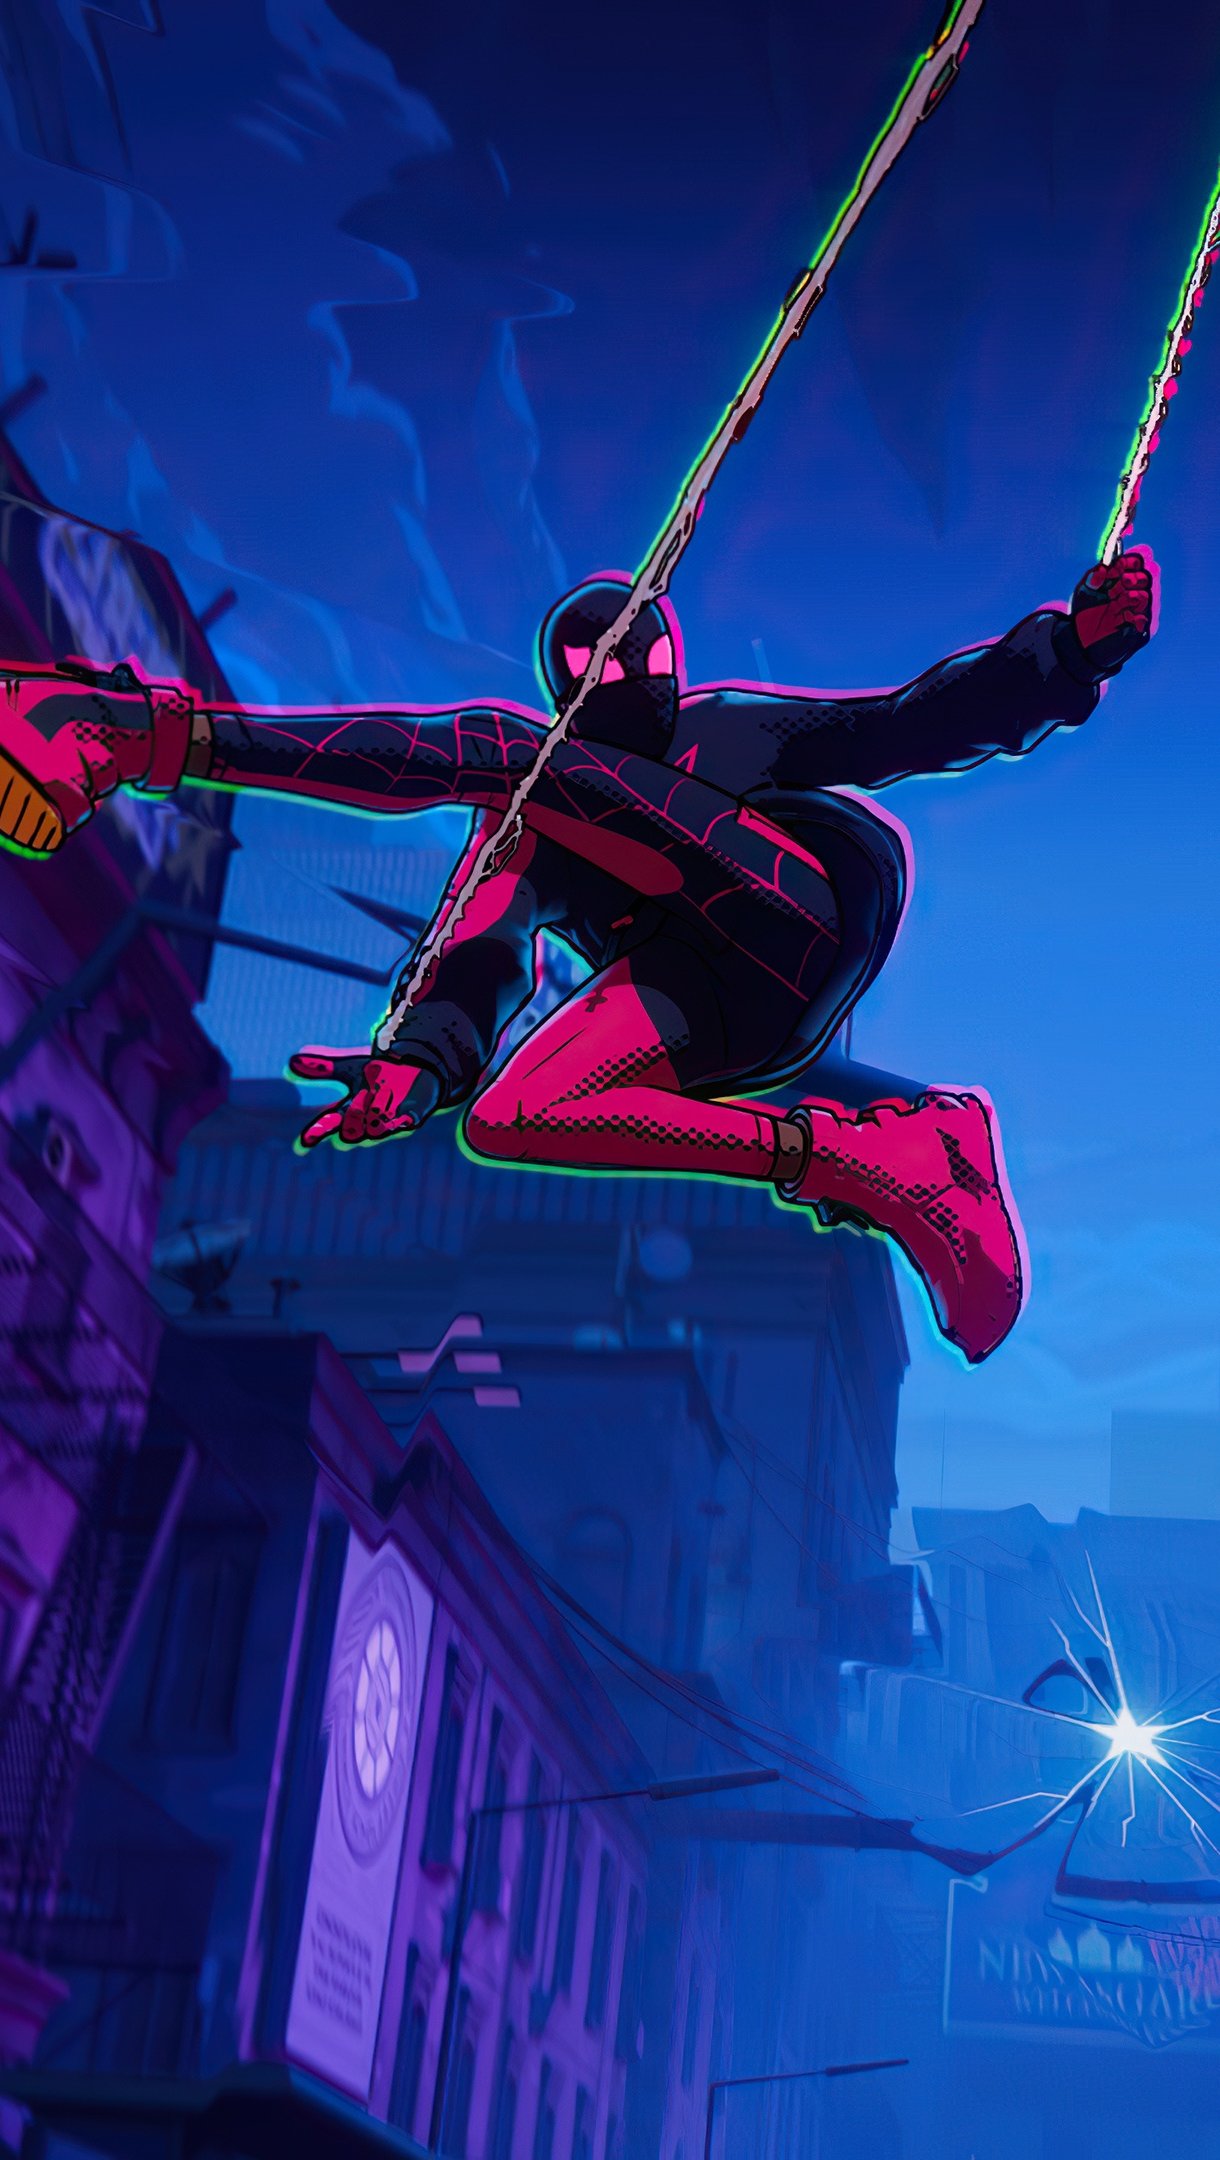 Miles Morales in the air Wallpaper 4k Ultra HD ID:11460